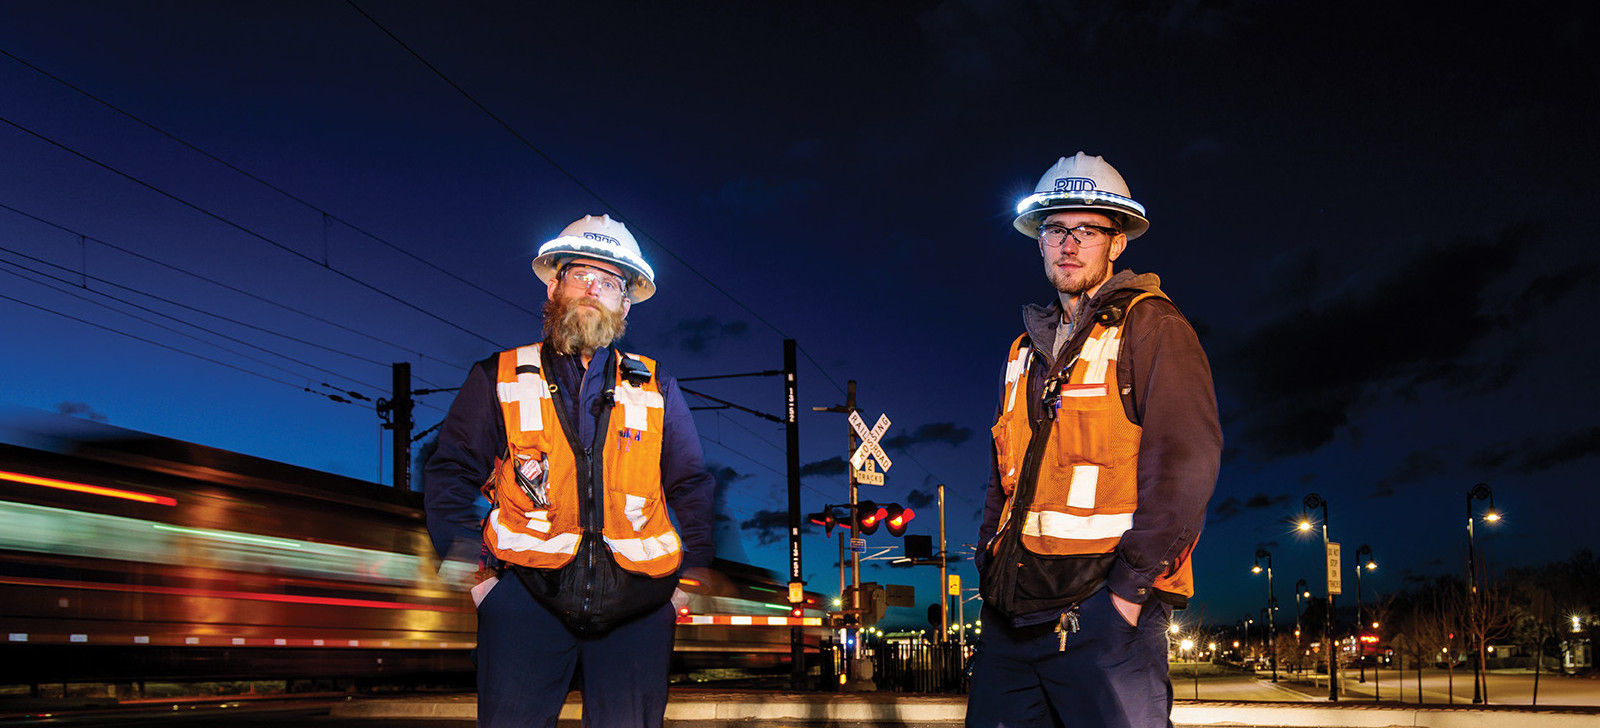 RTD Light Rail Maintenance Employees pose for a photo next to a moving train.